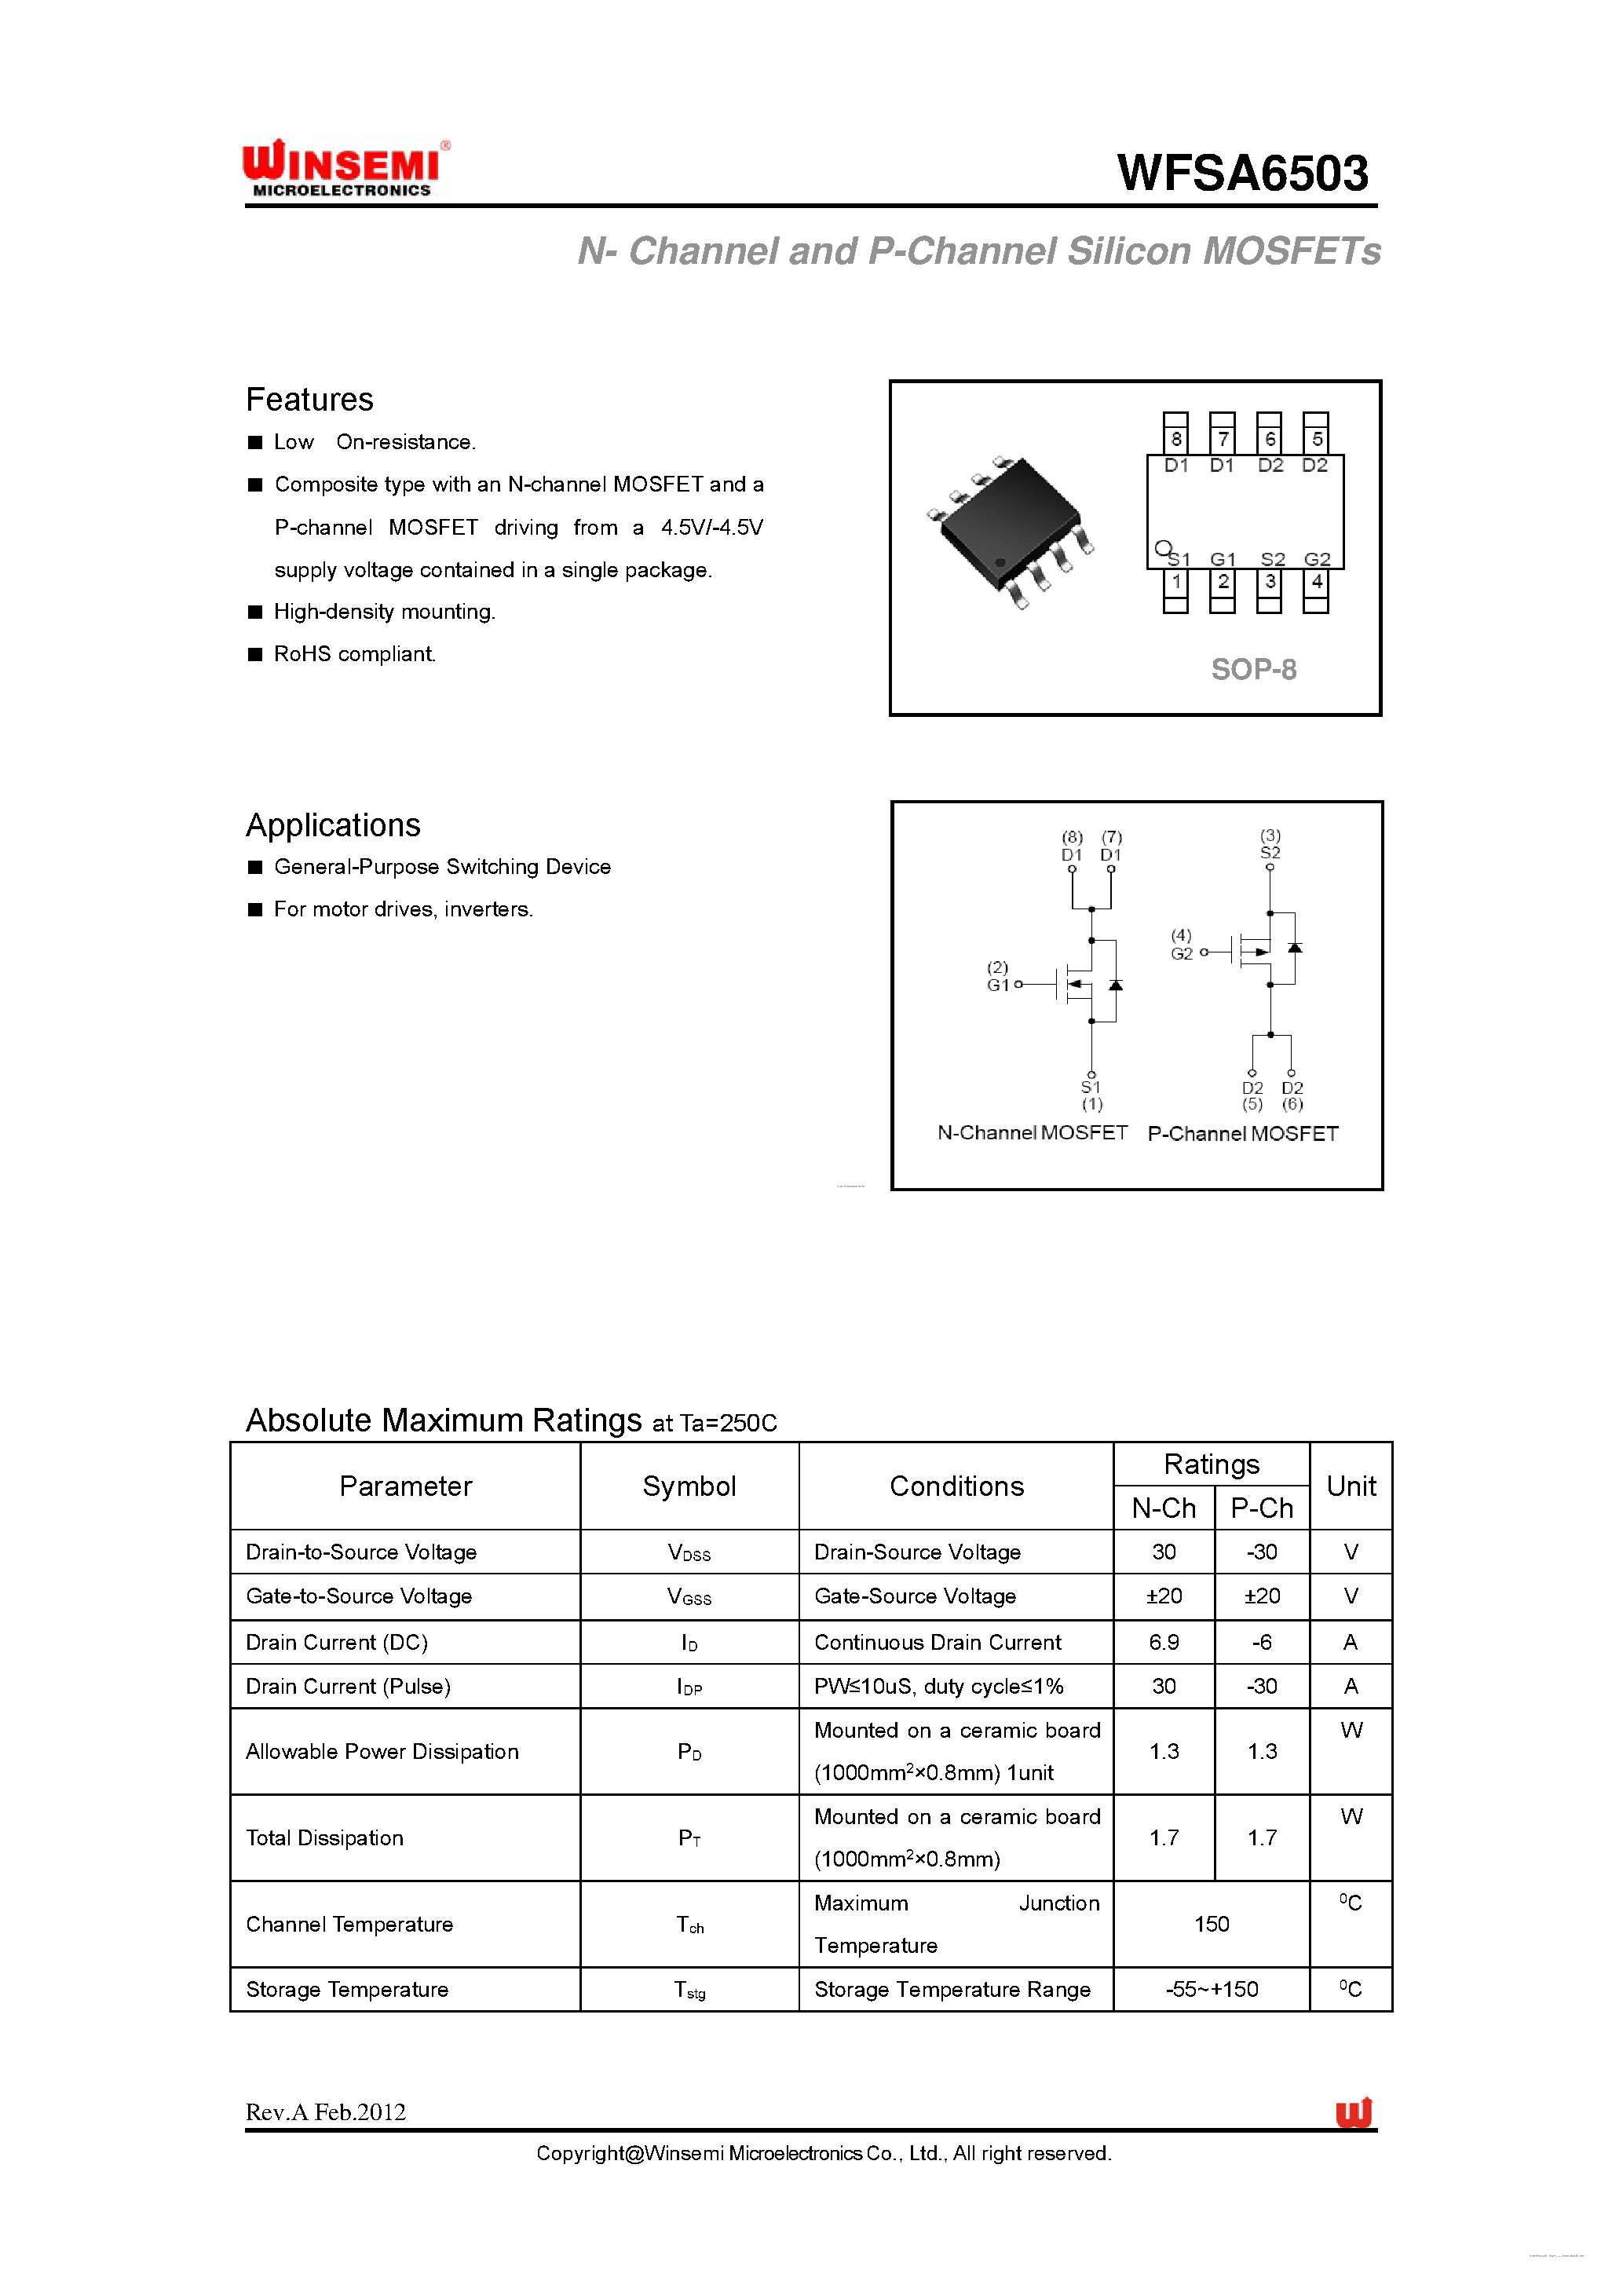 Datasheet WFSA6503 - N- Channel and P-Channel Silicon MOSFETs page 1